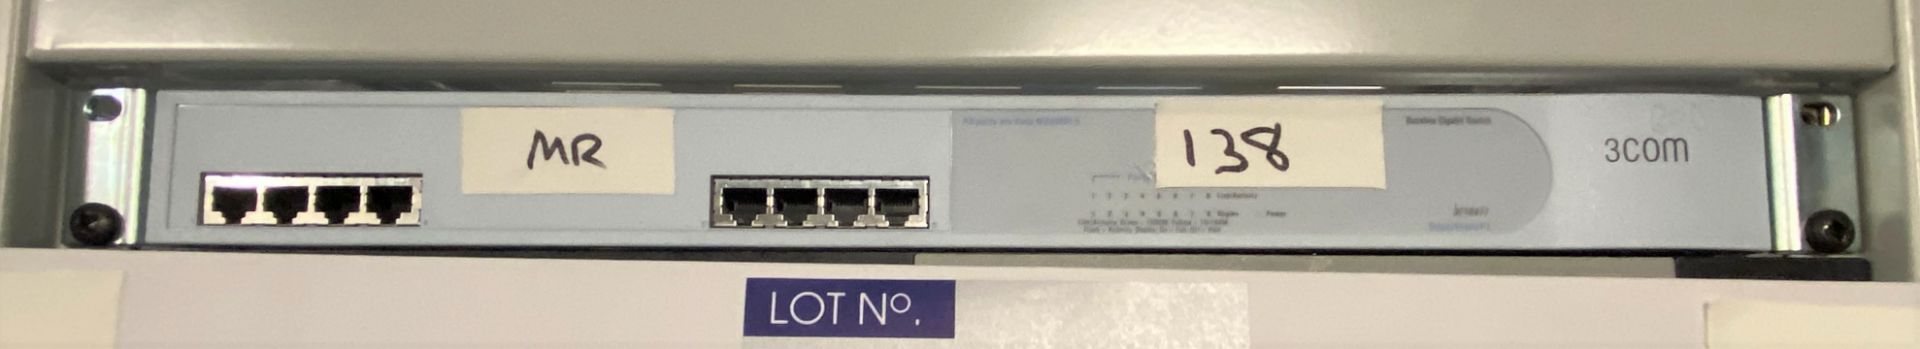 Assorted IT Switches comprising: A 3COM 3C16477 Baseline Gigabit Switch; Netgear DS508 and GS208